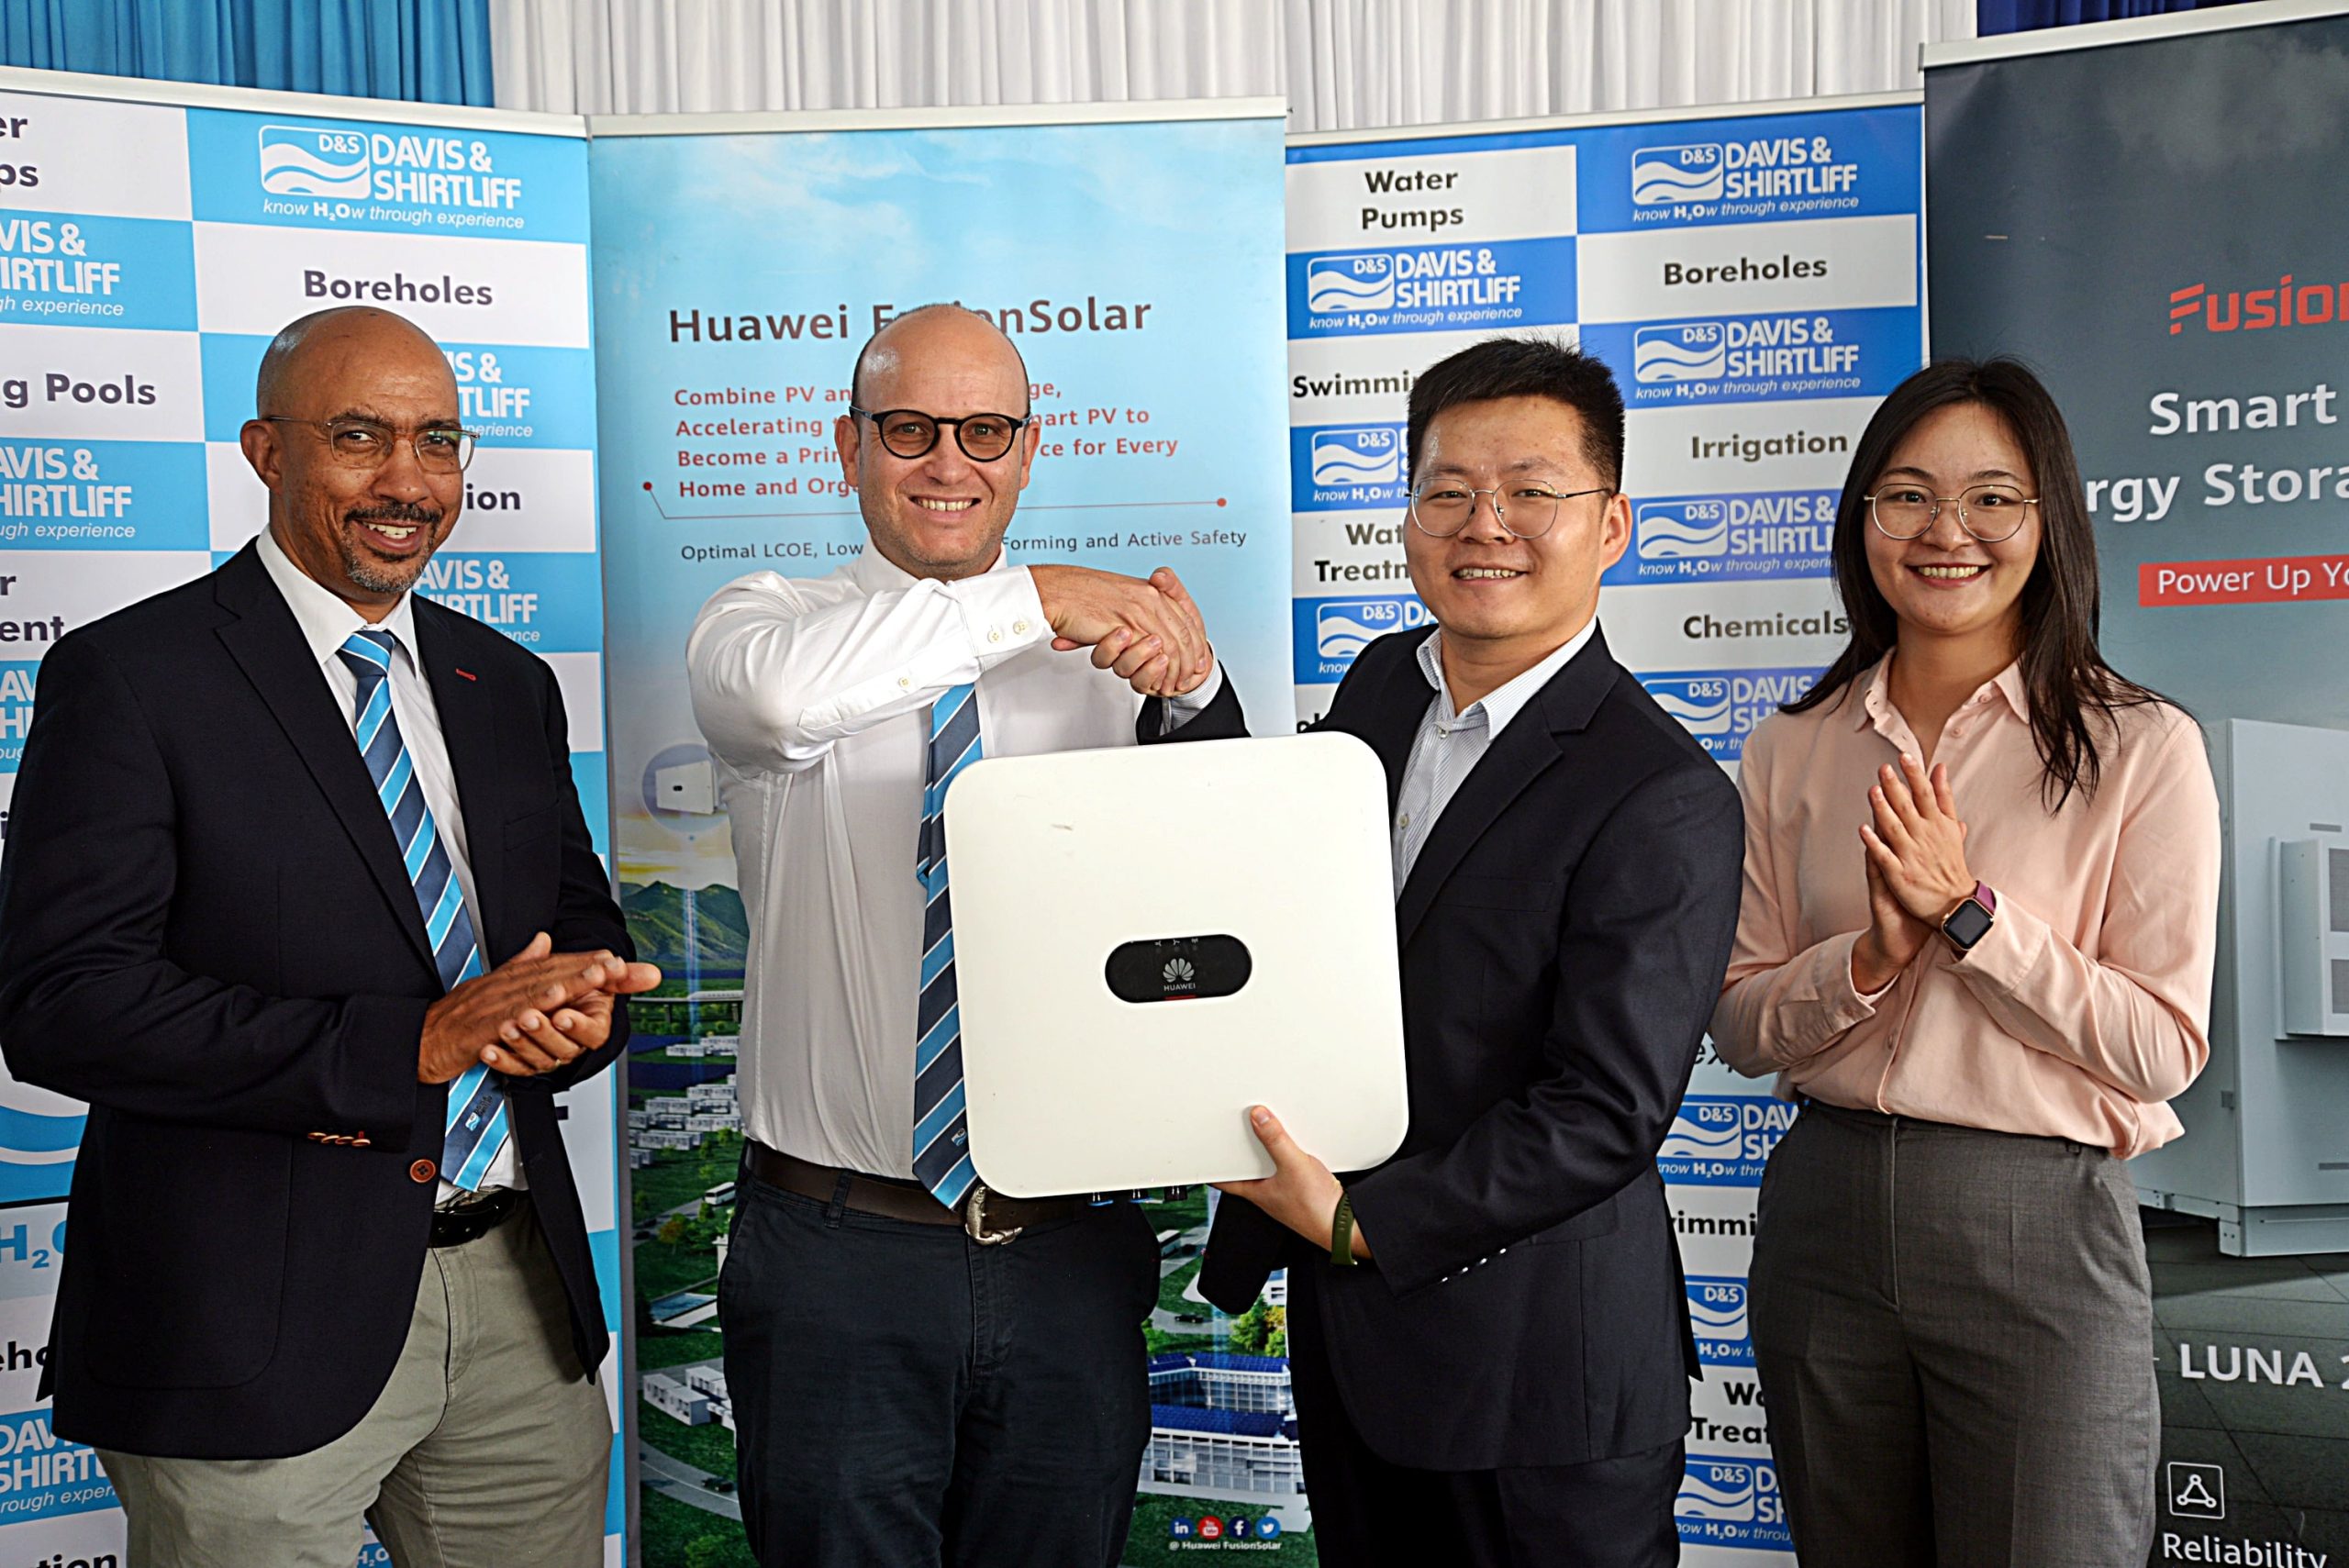 The water and energy equipment supplier will distribute Huawei’s solar products, including Grid Connect Inverters, Luna, and Power M backup solutions